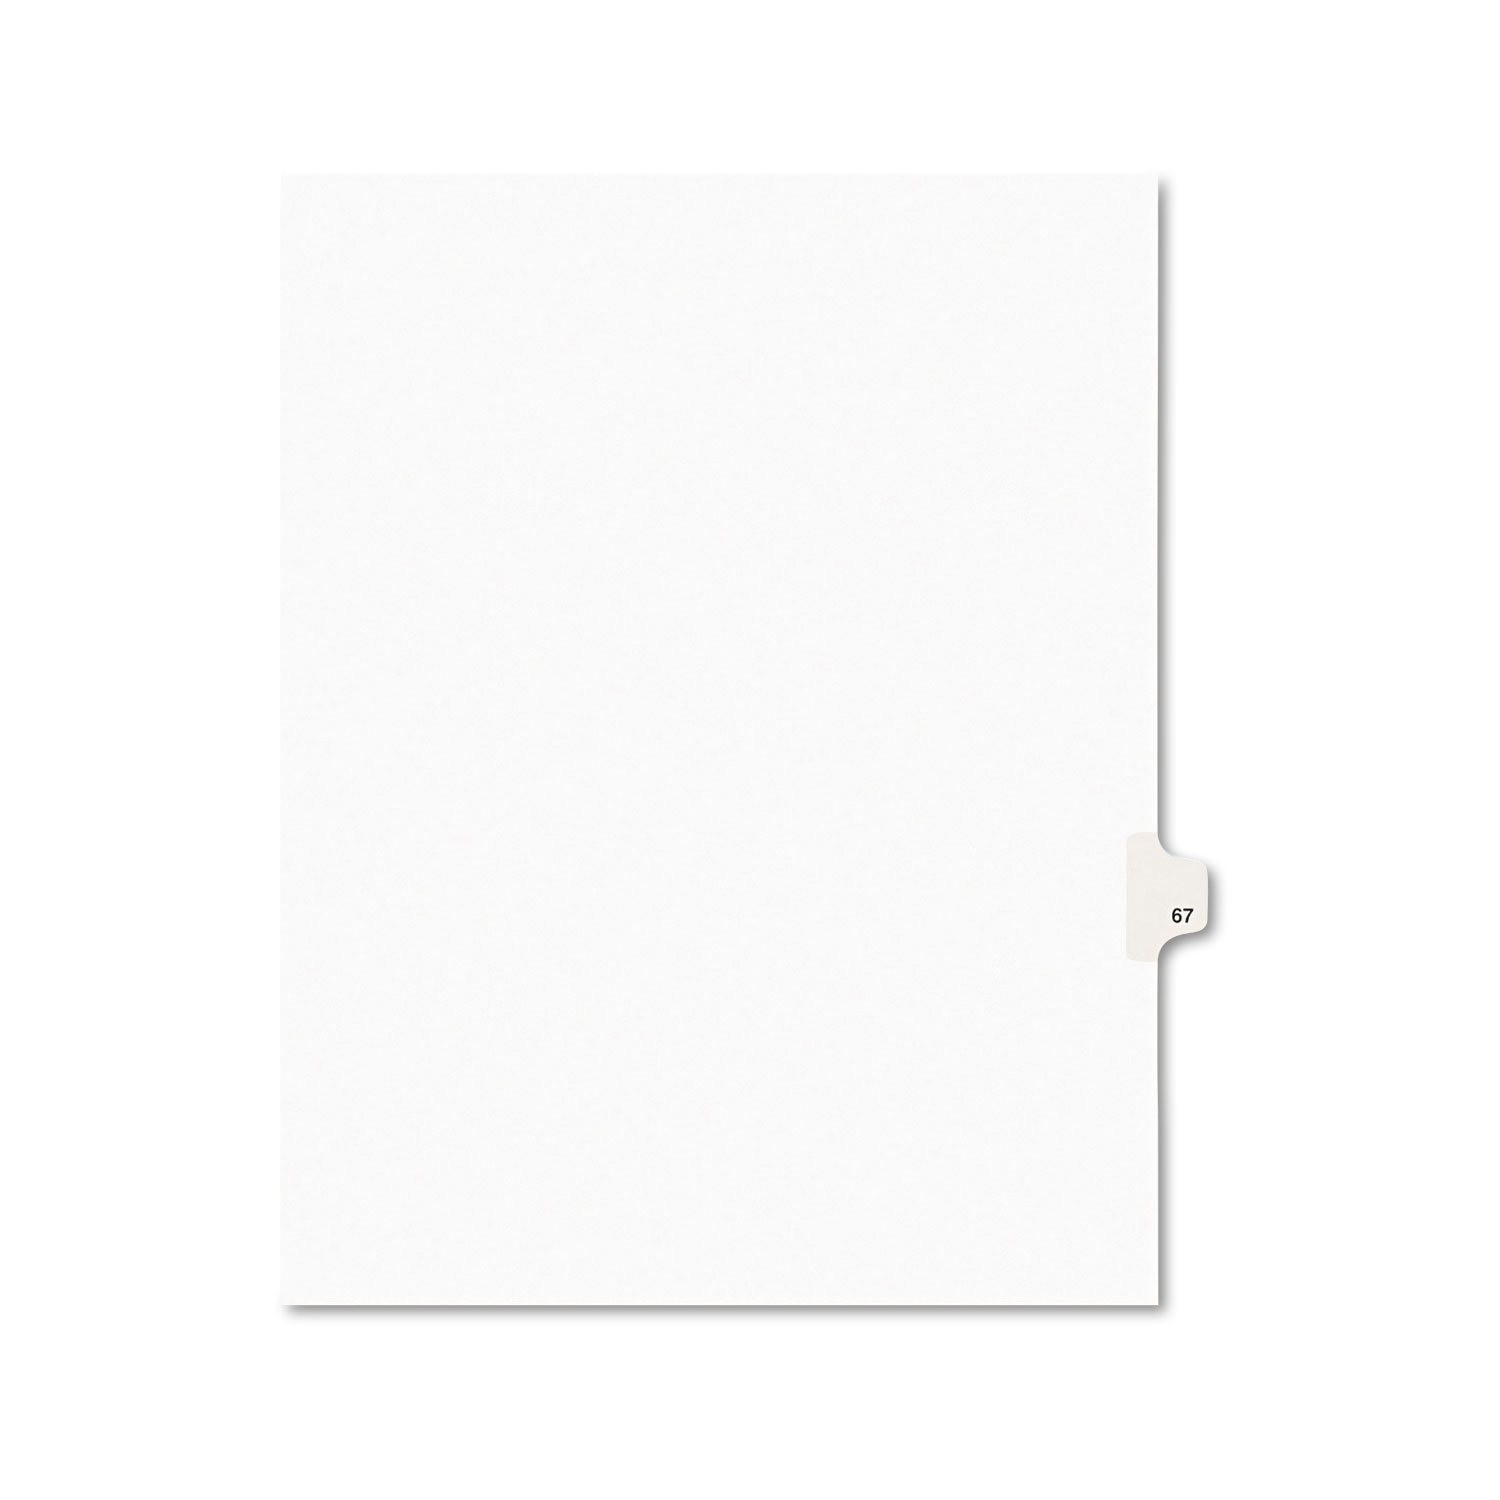  Avery 01067 Preprinted Legal Exhibit Side Tab Index Dividers, Avery Style, 10-Tab, 67, 11 x 8.5, White, 25/Pack (AVE01067) 